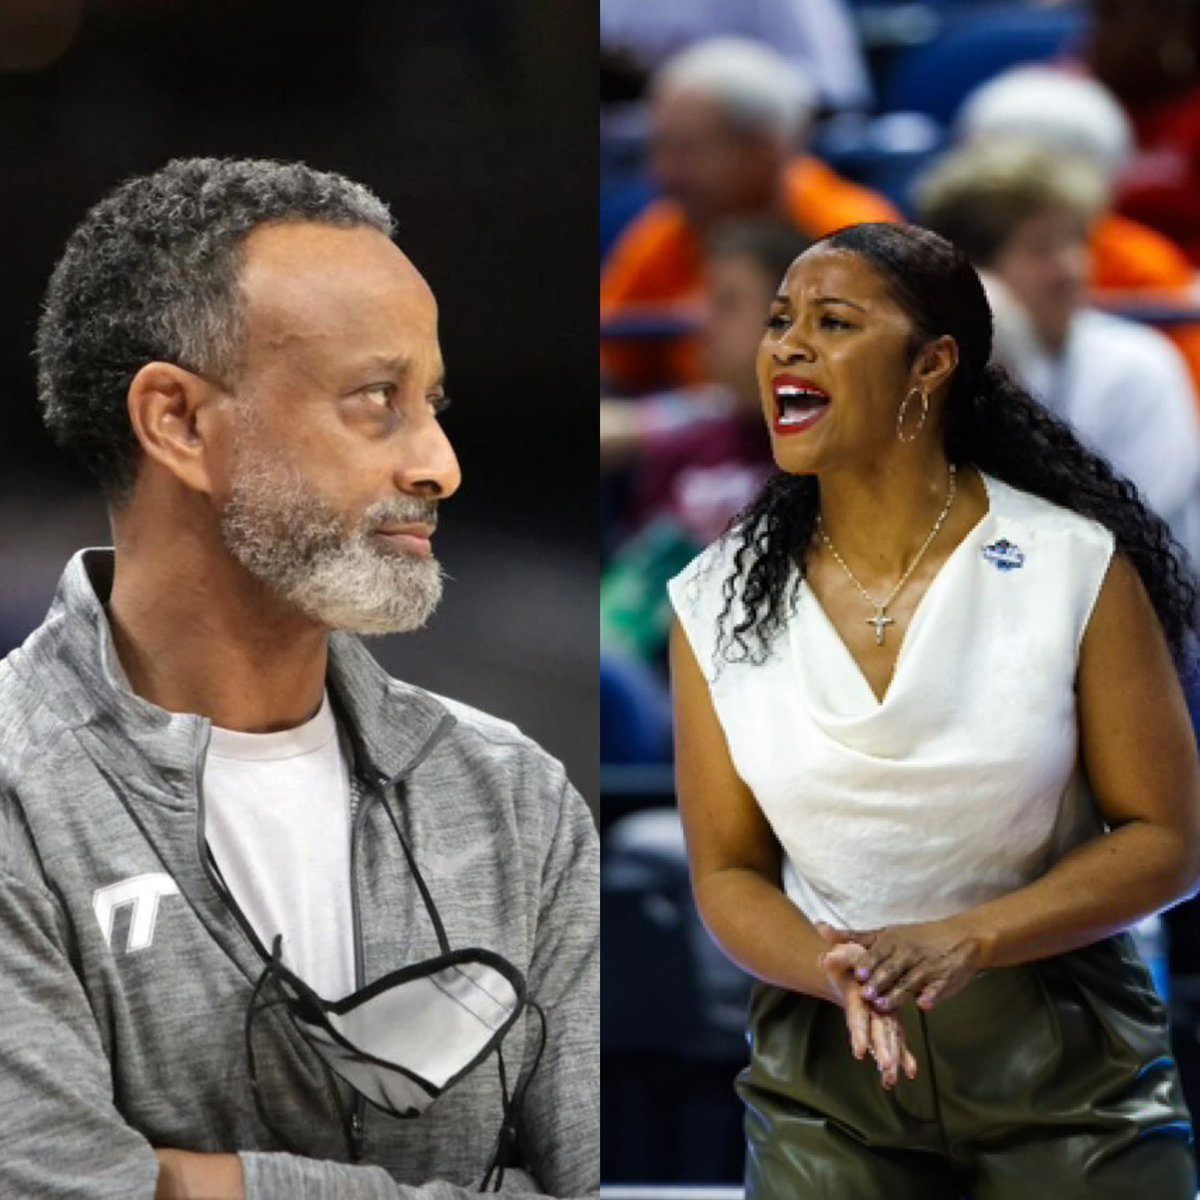 We have TWO Black Head Coaches facing off today! 🙌🏾

#ACCWBB